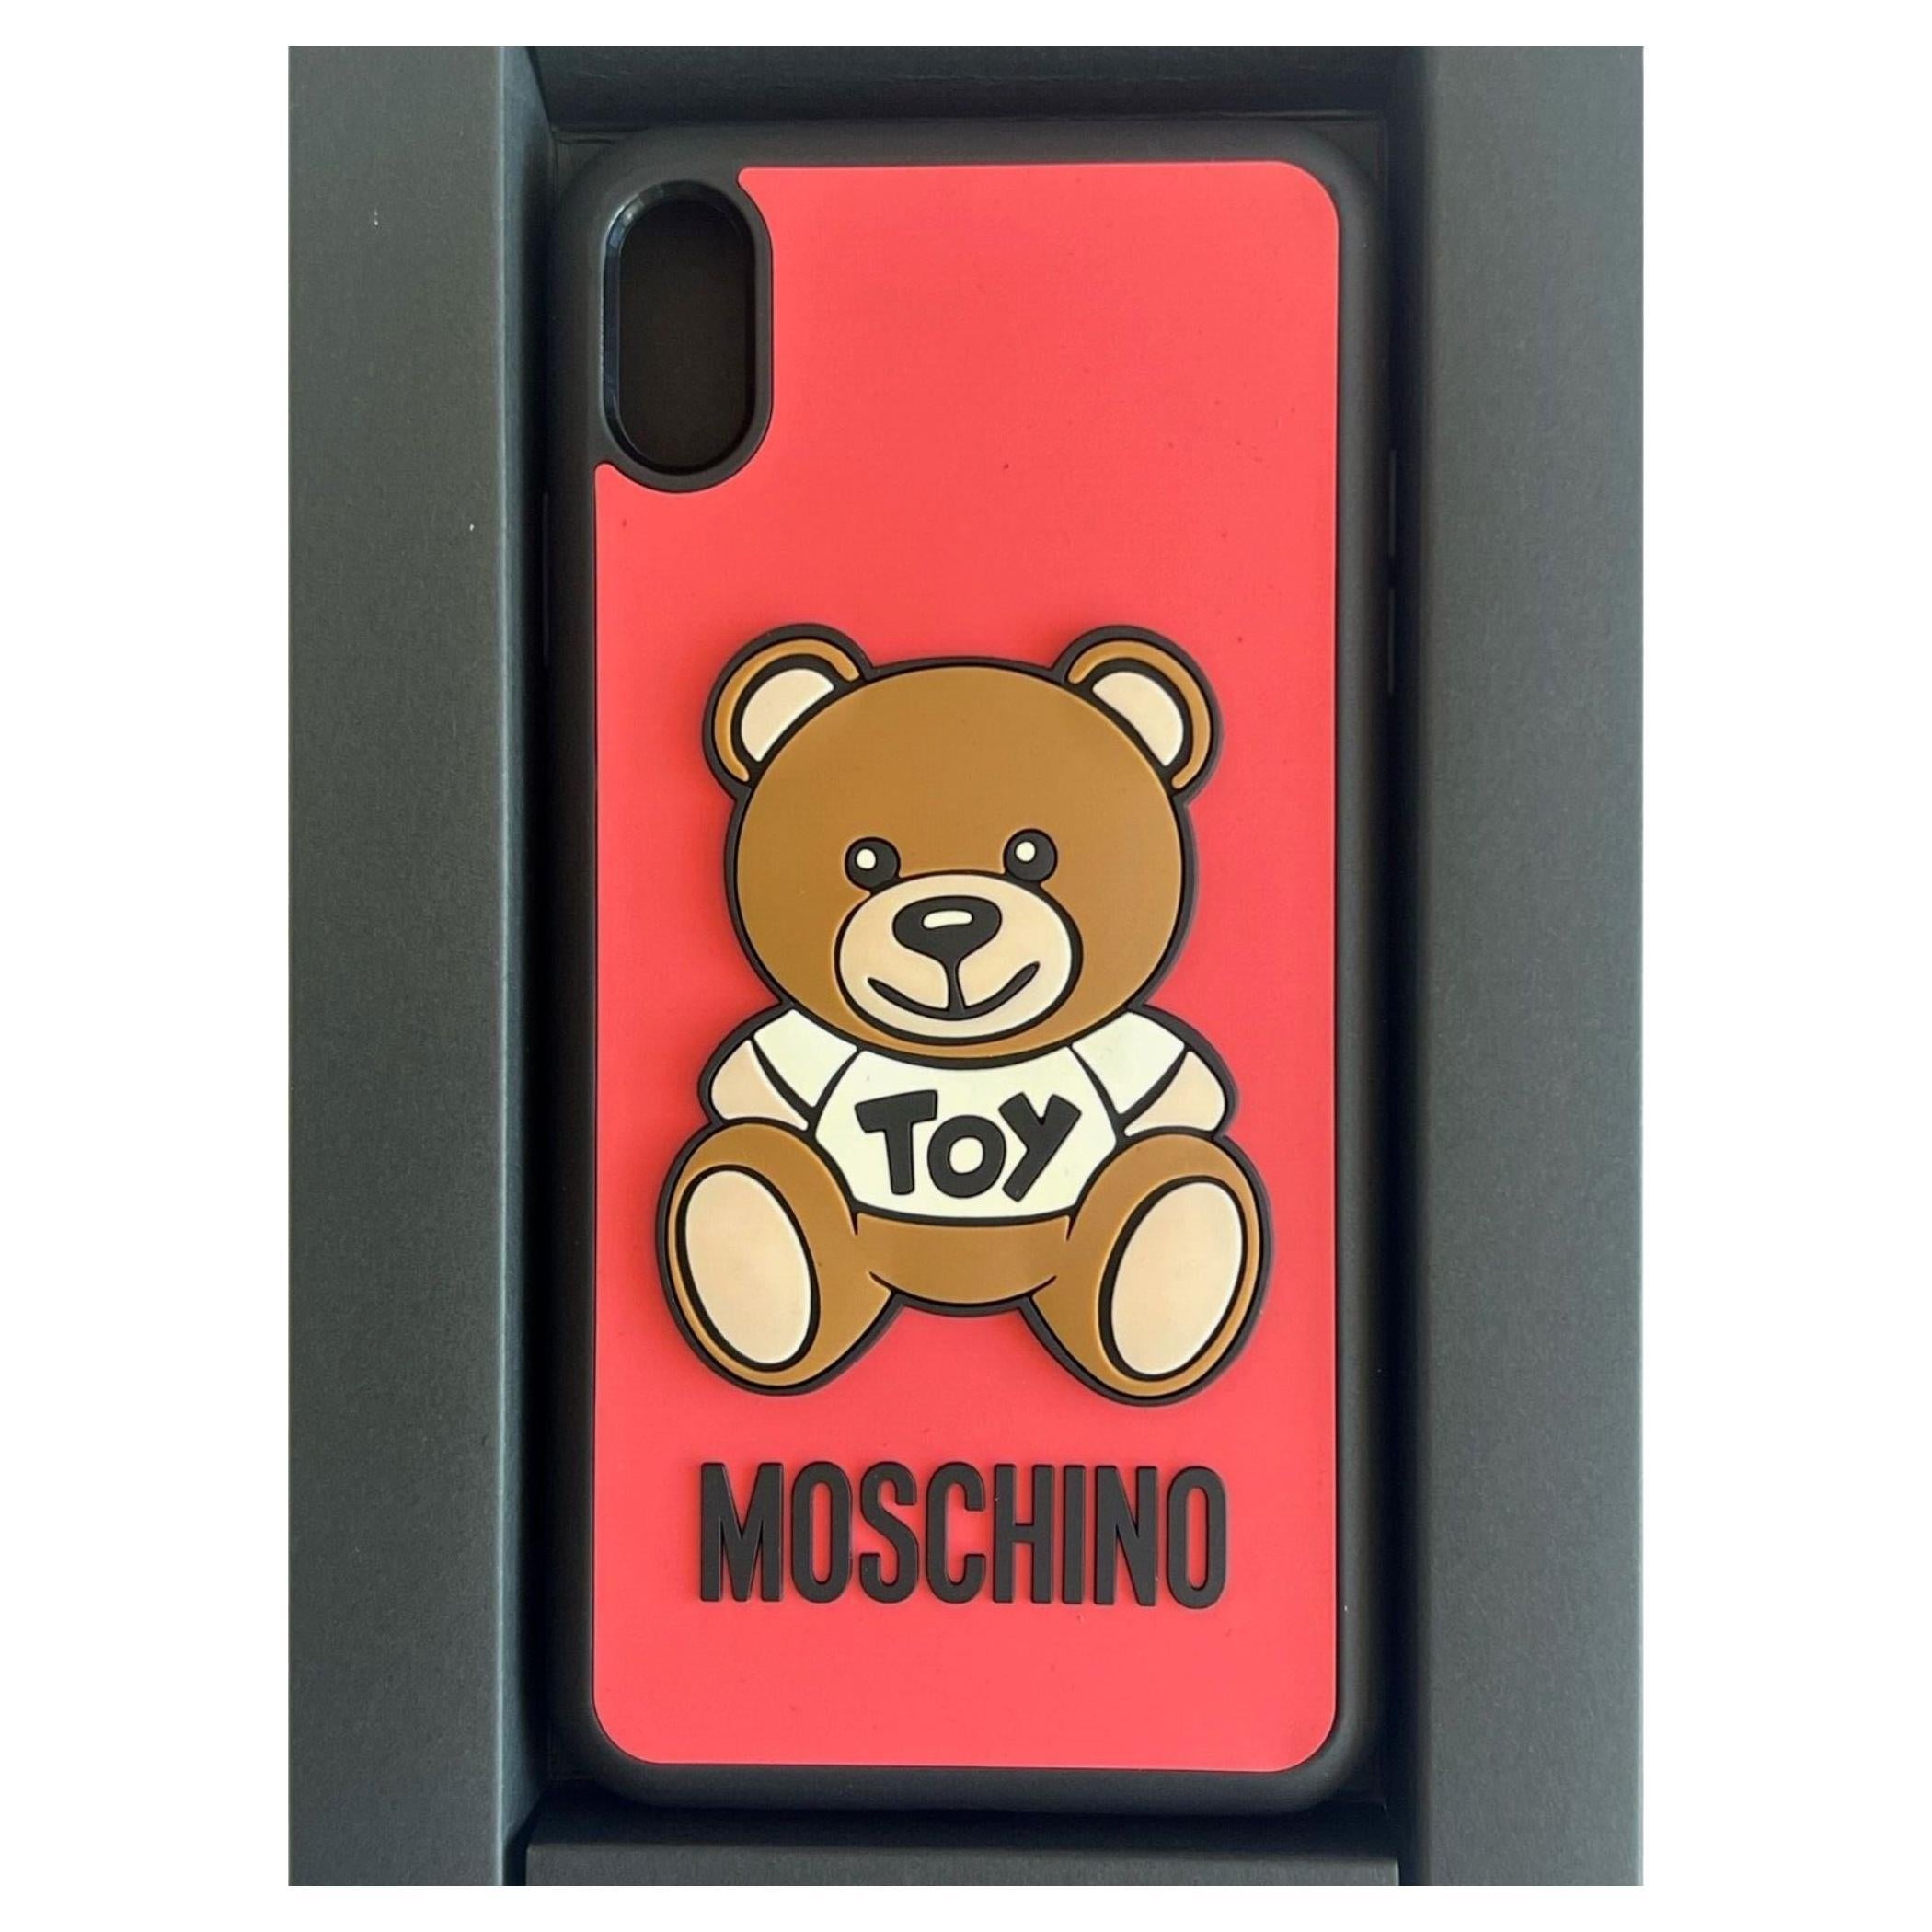 SS21 Moschino Couture Red iPhone XS Max Case with Teddy Bear Toy by Jeremy Scott